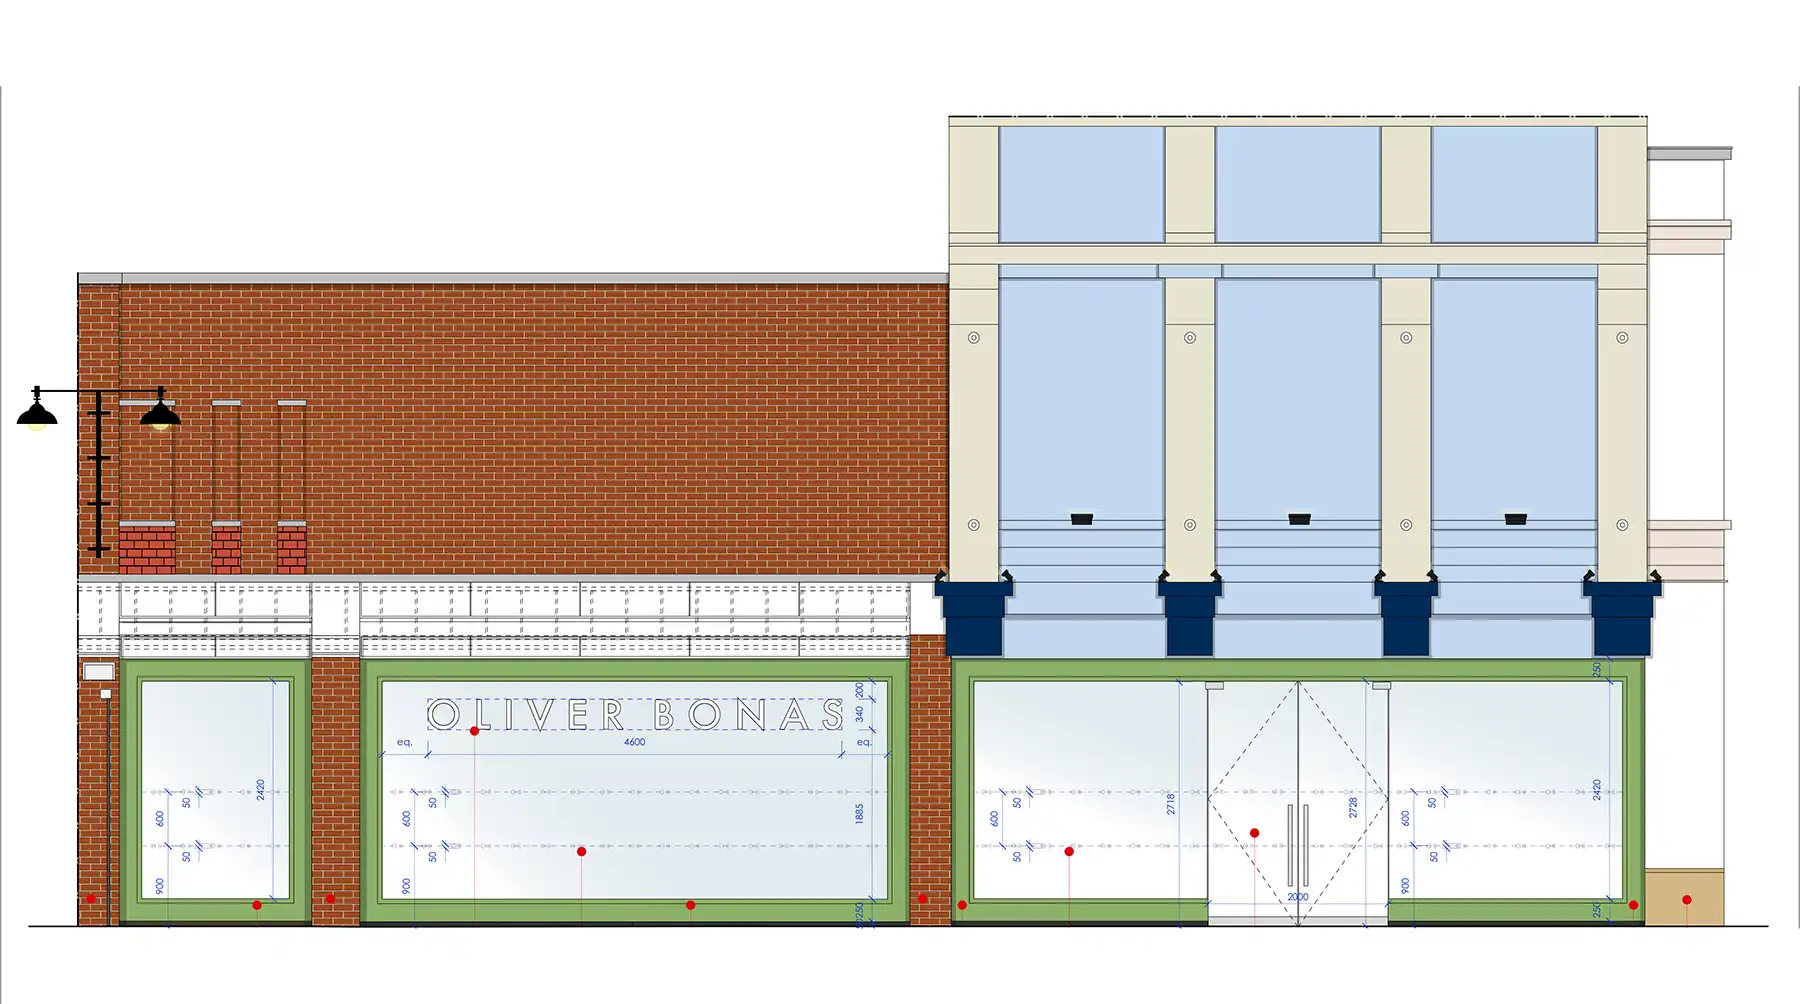 How one side of the store could look. Picture: Tanner/Wiltshire Council